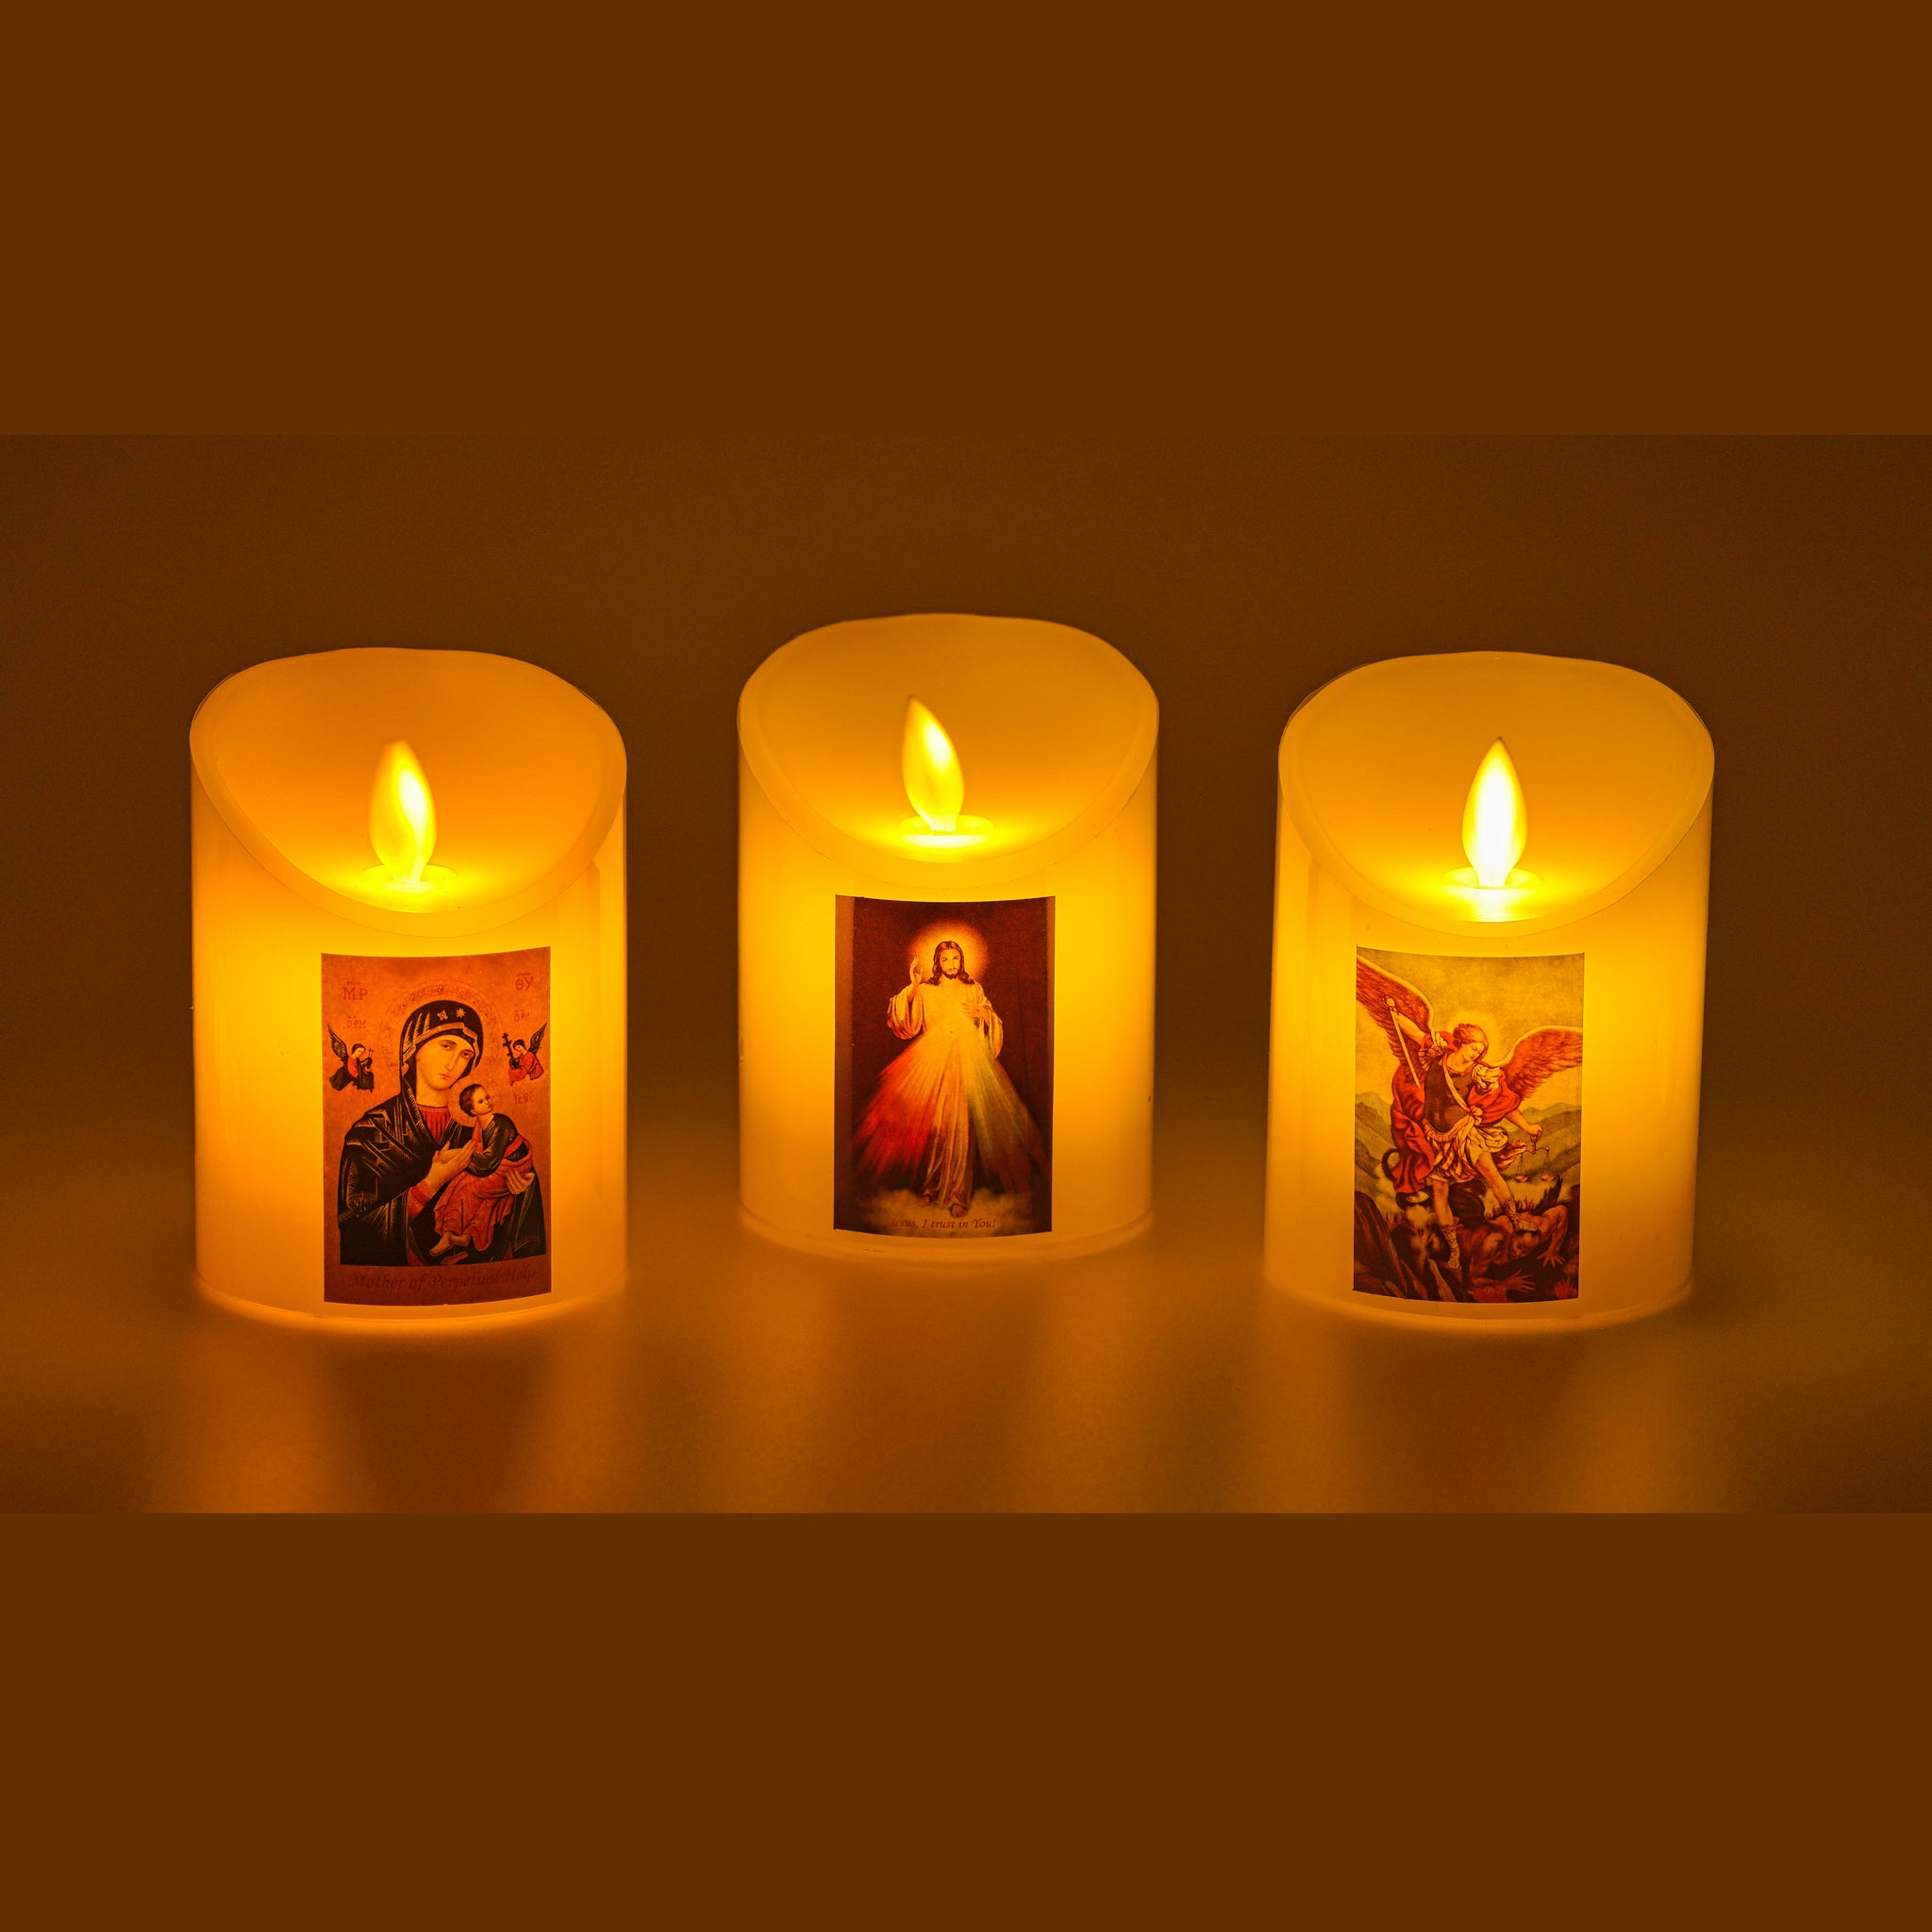 RECHARGEABLE LED CANDLES (MEDIUM) - B